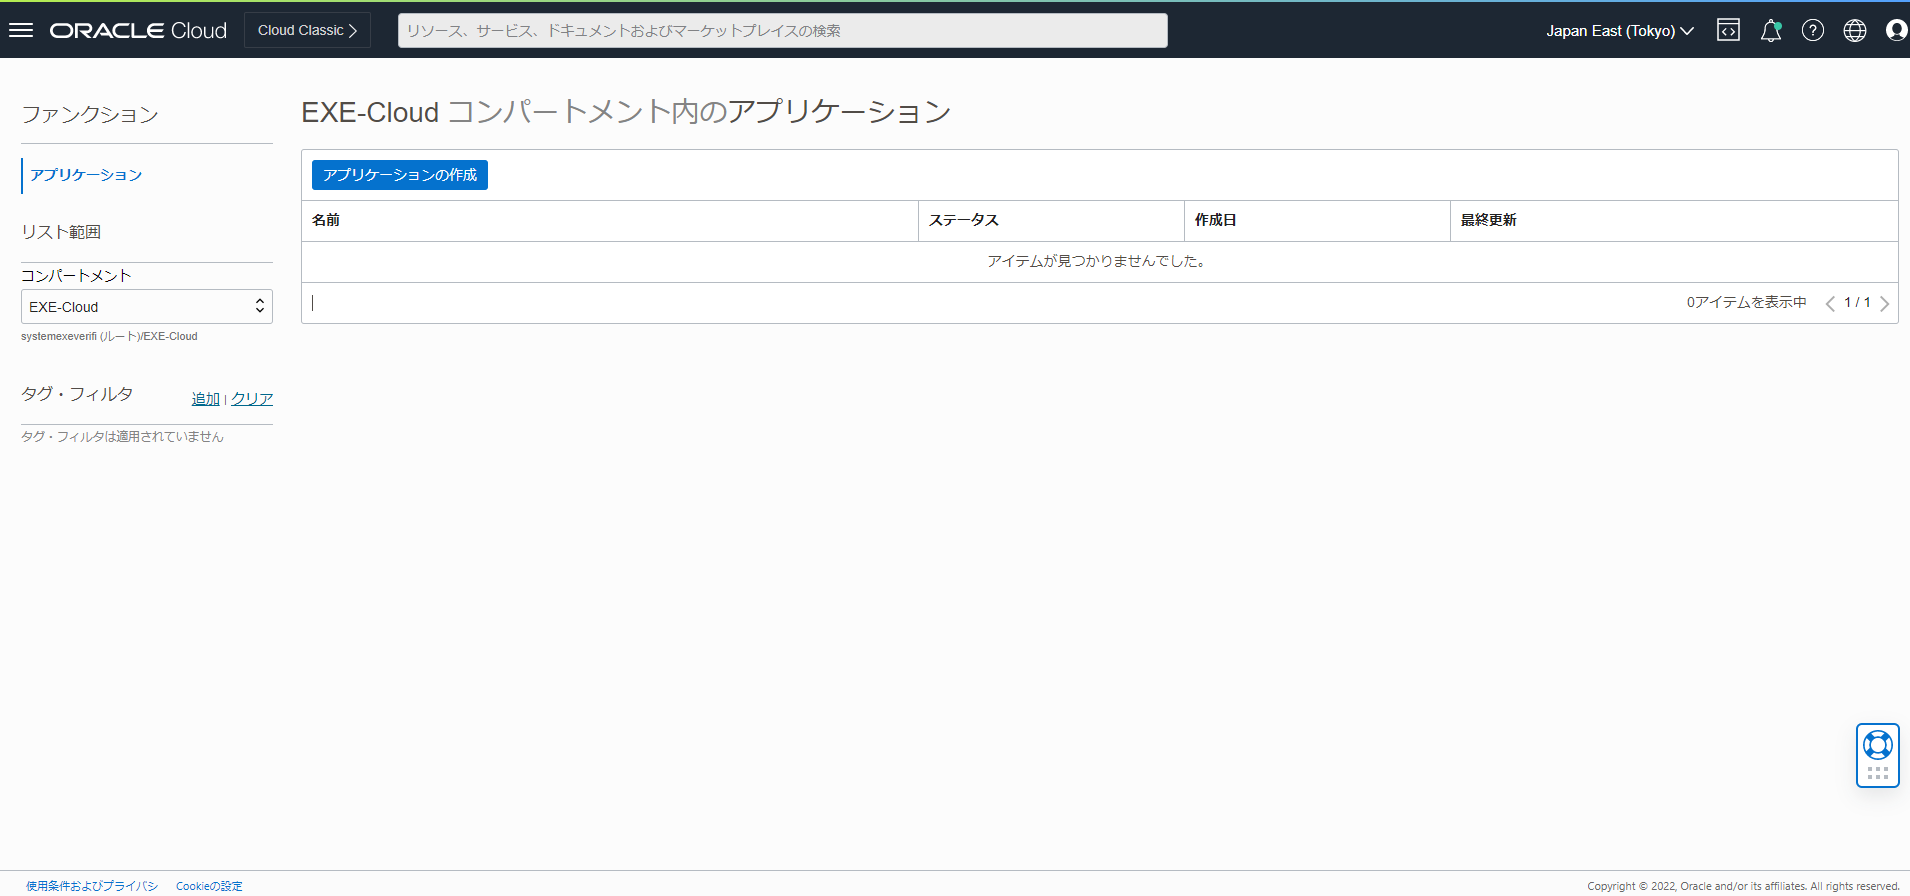 Oracle Cloud Infrastructure Functionsではじめるサーバレス入門 11